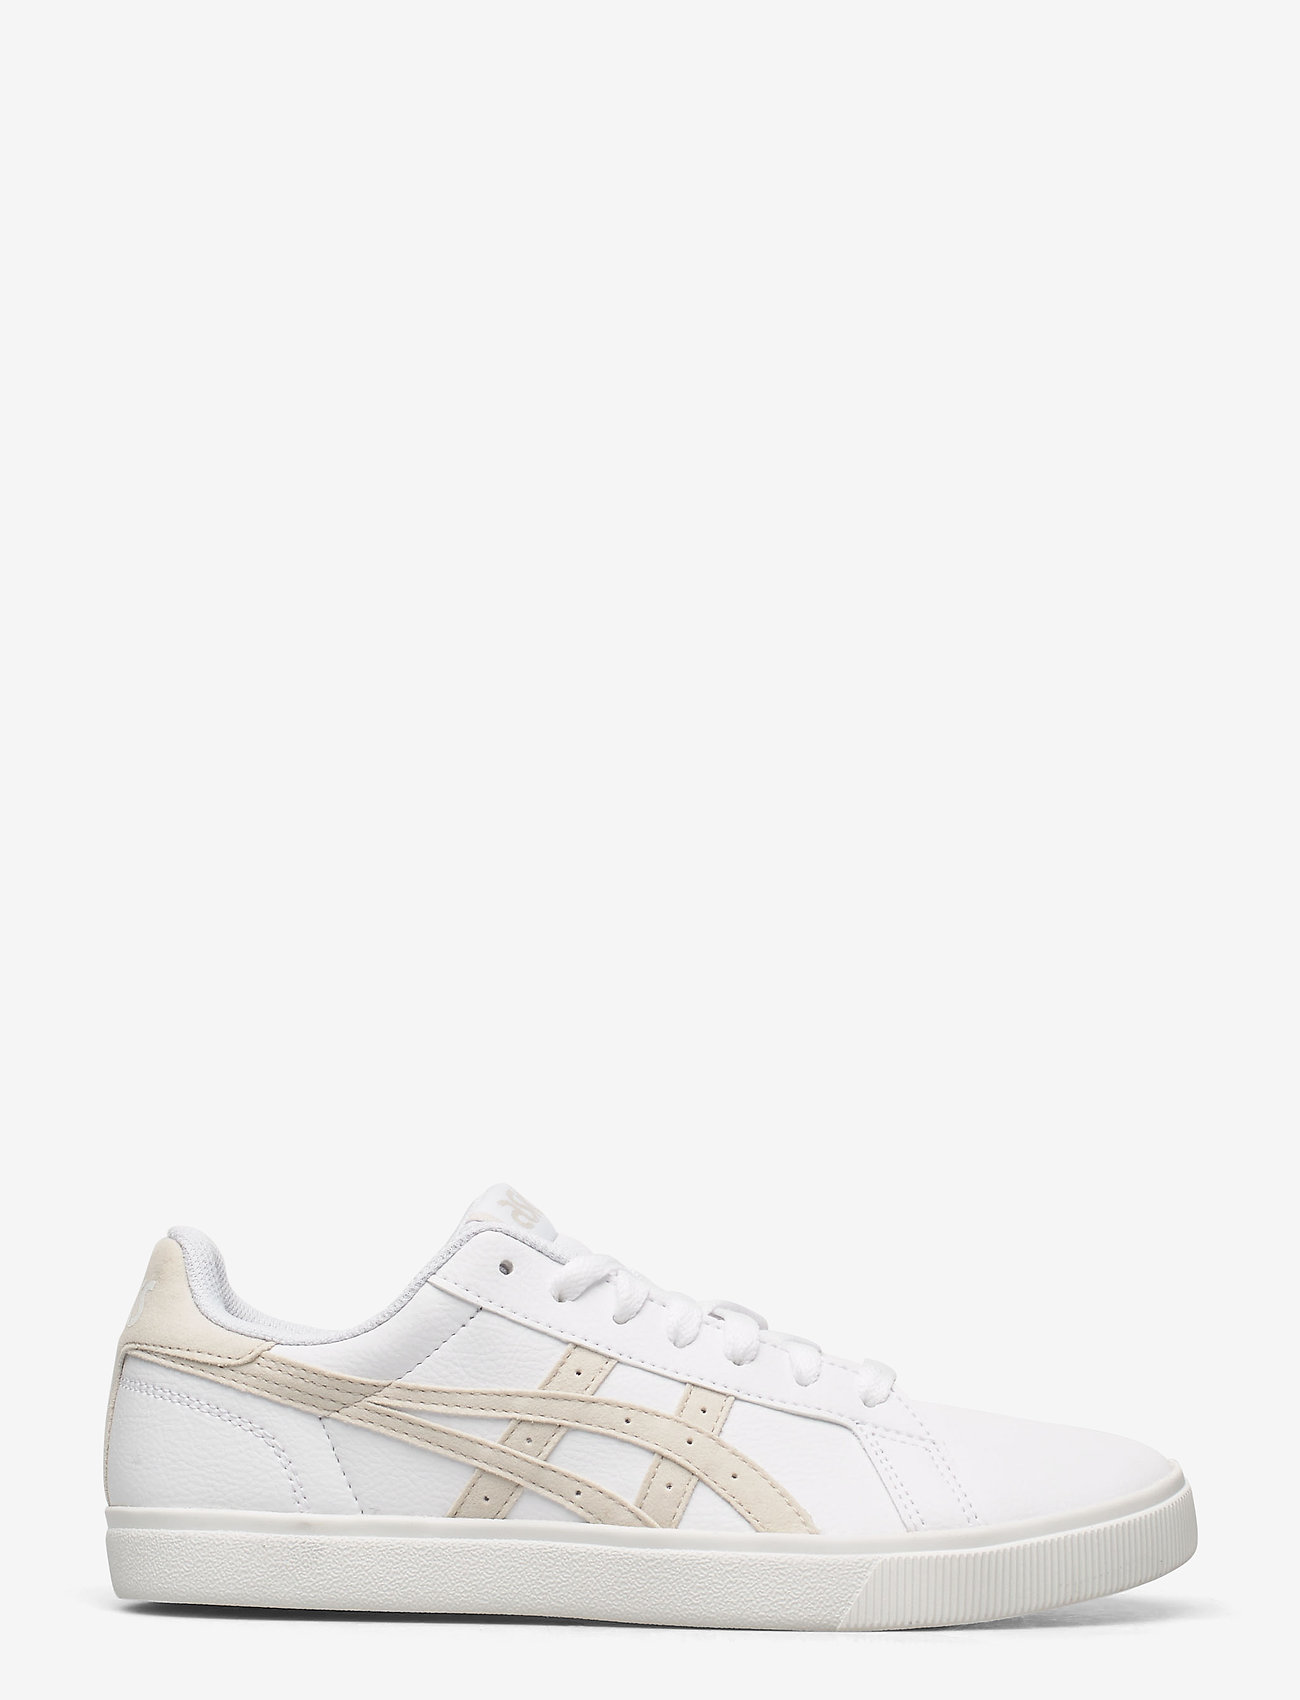 ASICS SportStyle Classic Ct - Low top sneakers | Boozt.com